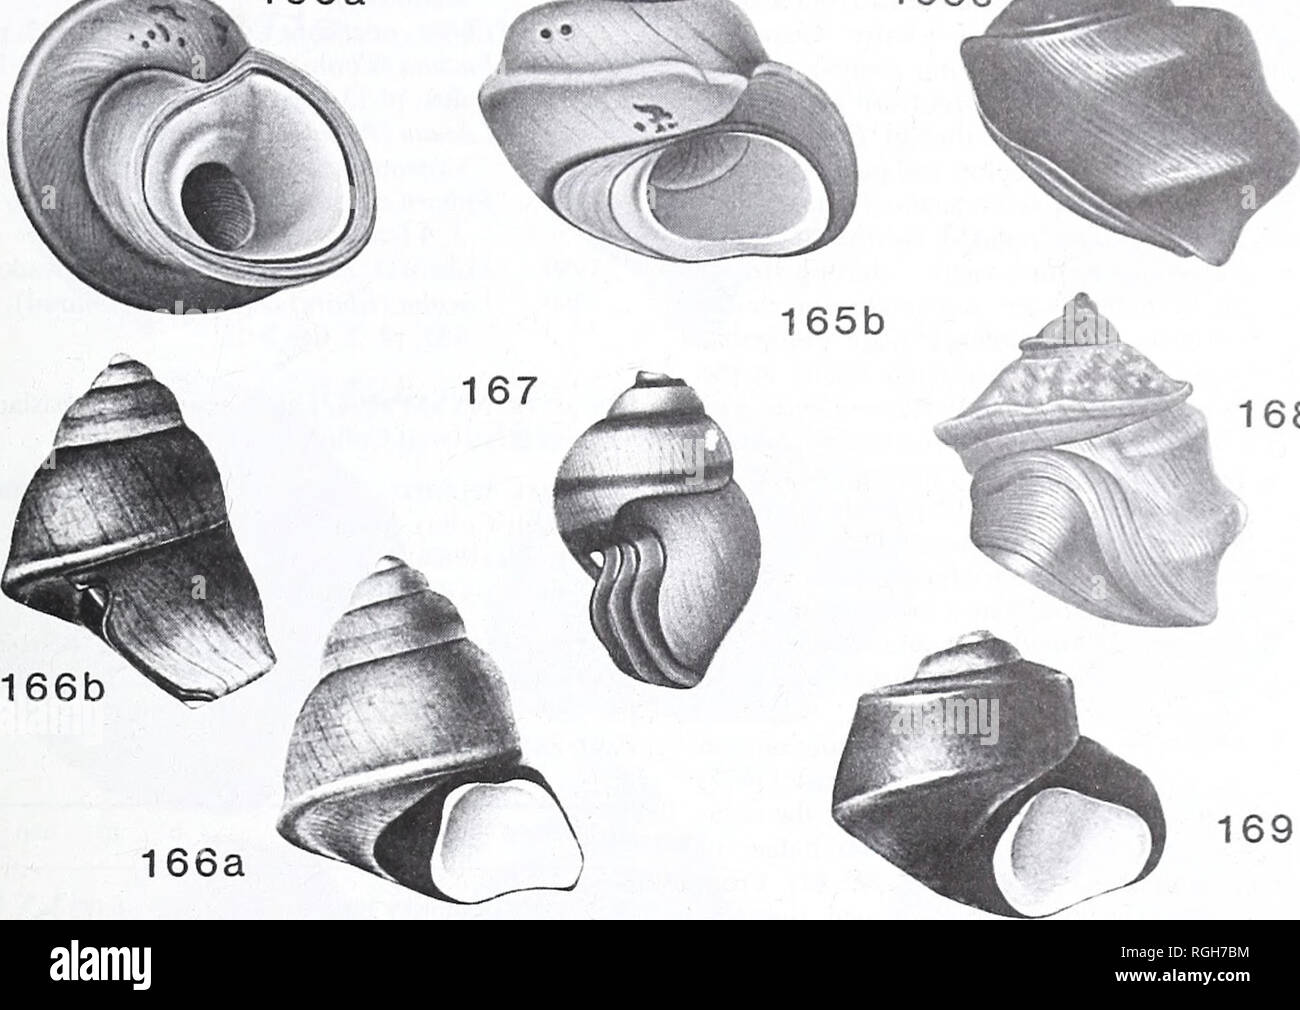 . Bulletin of the British Museum (Natural History). Geology.. 168. 166b 166a Figs 165-169 Potamolithus. Recent species from Uruguay also occurring in adjoining parts of Argentina. Illustrations copied from Pilsbry (1911). 165a, b, c, Potamolithus rushi Pilsbry (1911: pi. 38, figs 1, la, lb; type illustrations of type species of Potamolithus Pilsbry); Paysandii. Uruguay River; x 7.5. 166a, b, Potamolithus filiponei von Ihering, figured Pilsbry (1911: pi. 41a, figs 8, 8a), Montevideo; x 8. 167, Potamolithus bisinuatus obsoletus Pilsbry (1911: pi. 41, fig. 7a), gerontic paratype; Rio de la Plata, Stock Photo